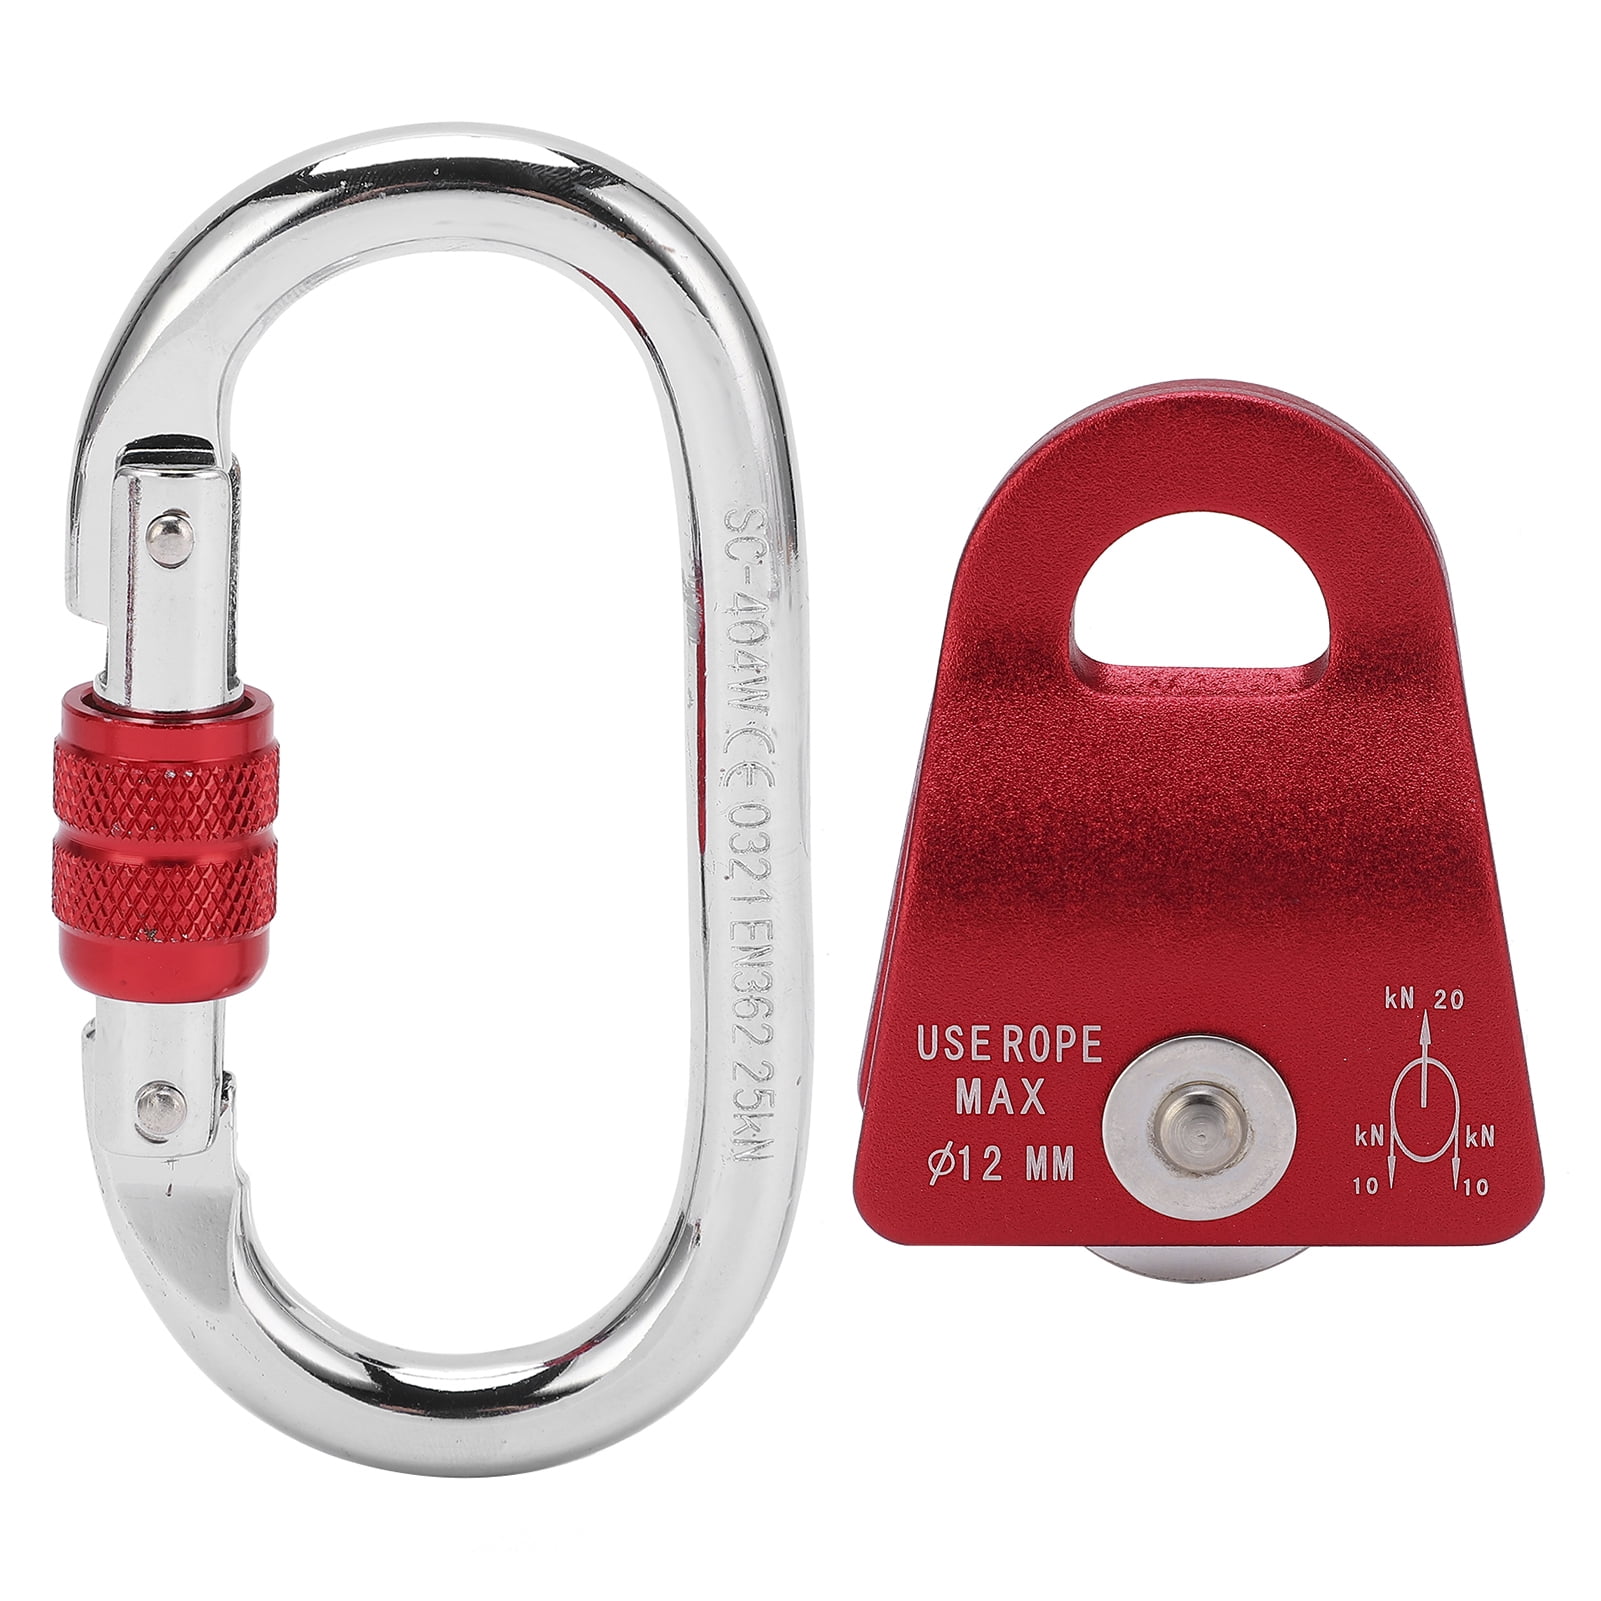 Climbing Rock Zip Line Cable Trolley Fast Speed Pulley Slider Carabiner Tool 1x 